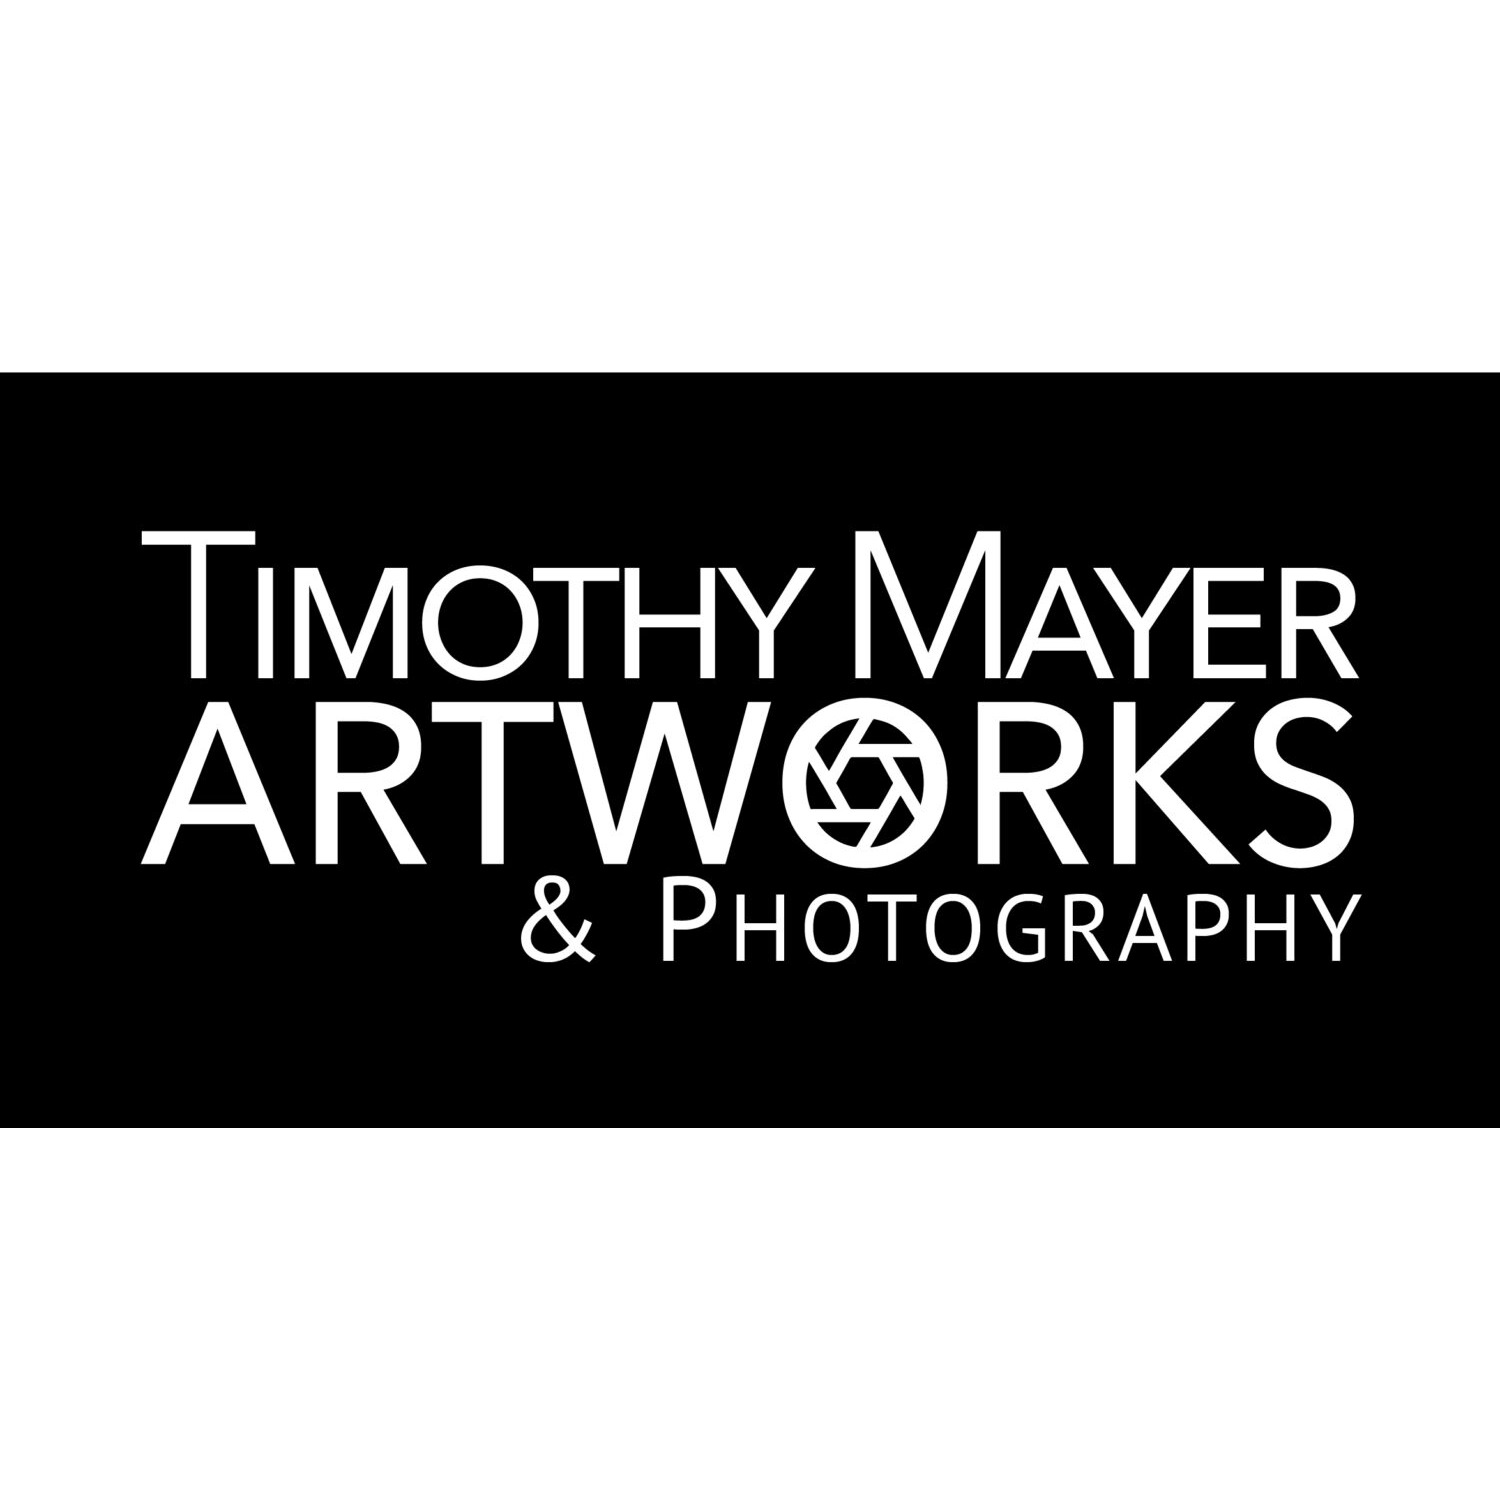 Timothy Mayer Artworks and Photography